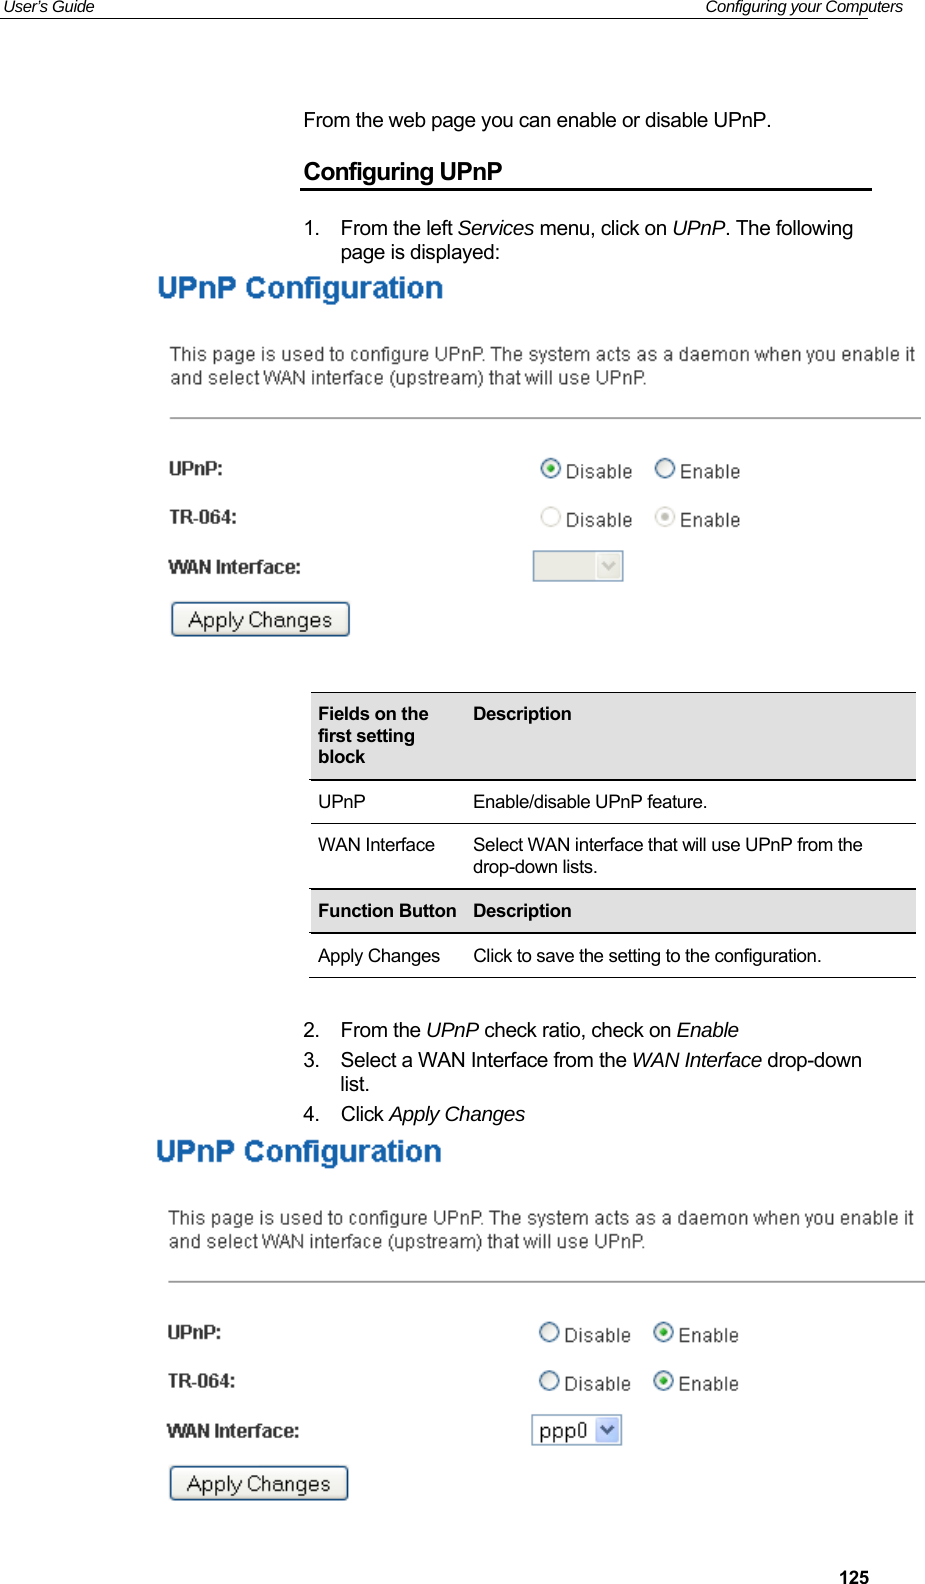 User’s Guide   Configuring your Computers  125 From the web page you can enable or disable UPnP. Configuring UPnP 1.  From the left Services menu, click on UPnP. The following page is displayed:             2.  From the UPnP check ratio, check on Enable 3.  Select a WAN Interface from the WAN Interface drop-down list. 4.  Click Apply Changes   Fields on the first setting block Description UPnP  Enable/disable UPnP feature. WAN Interface  Select WAN interface that will use UPnP from the drop-down lists. Function Button Description Apply Changes  Click to save the setting to the configuration. 